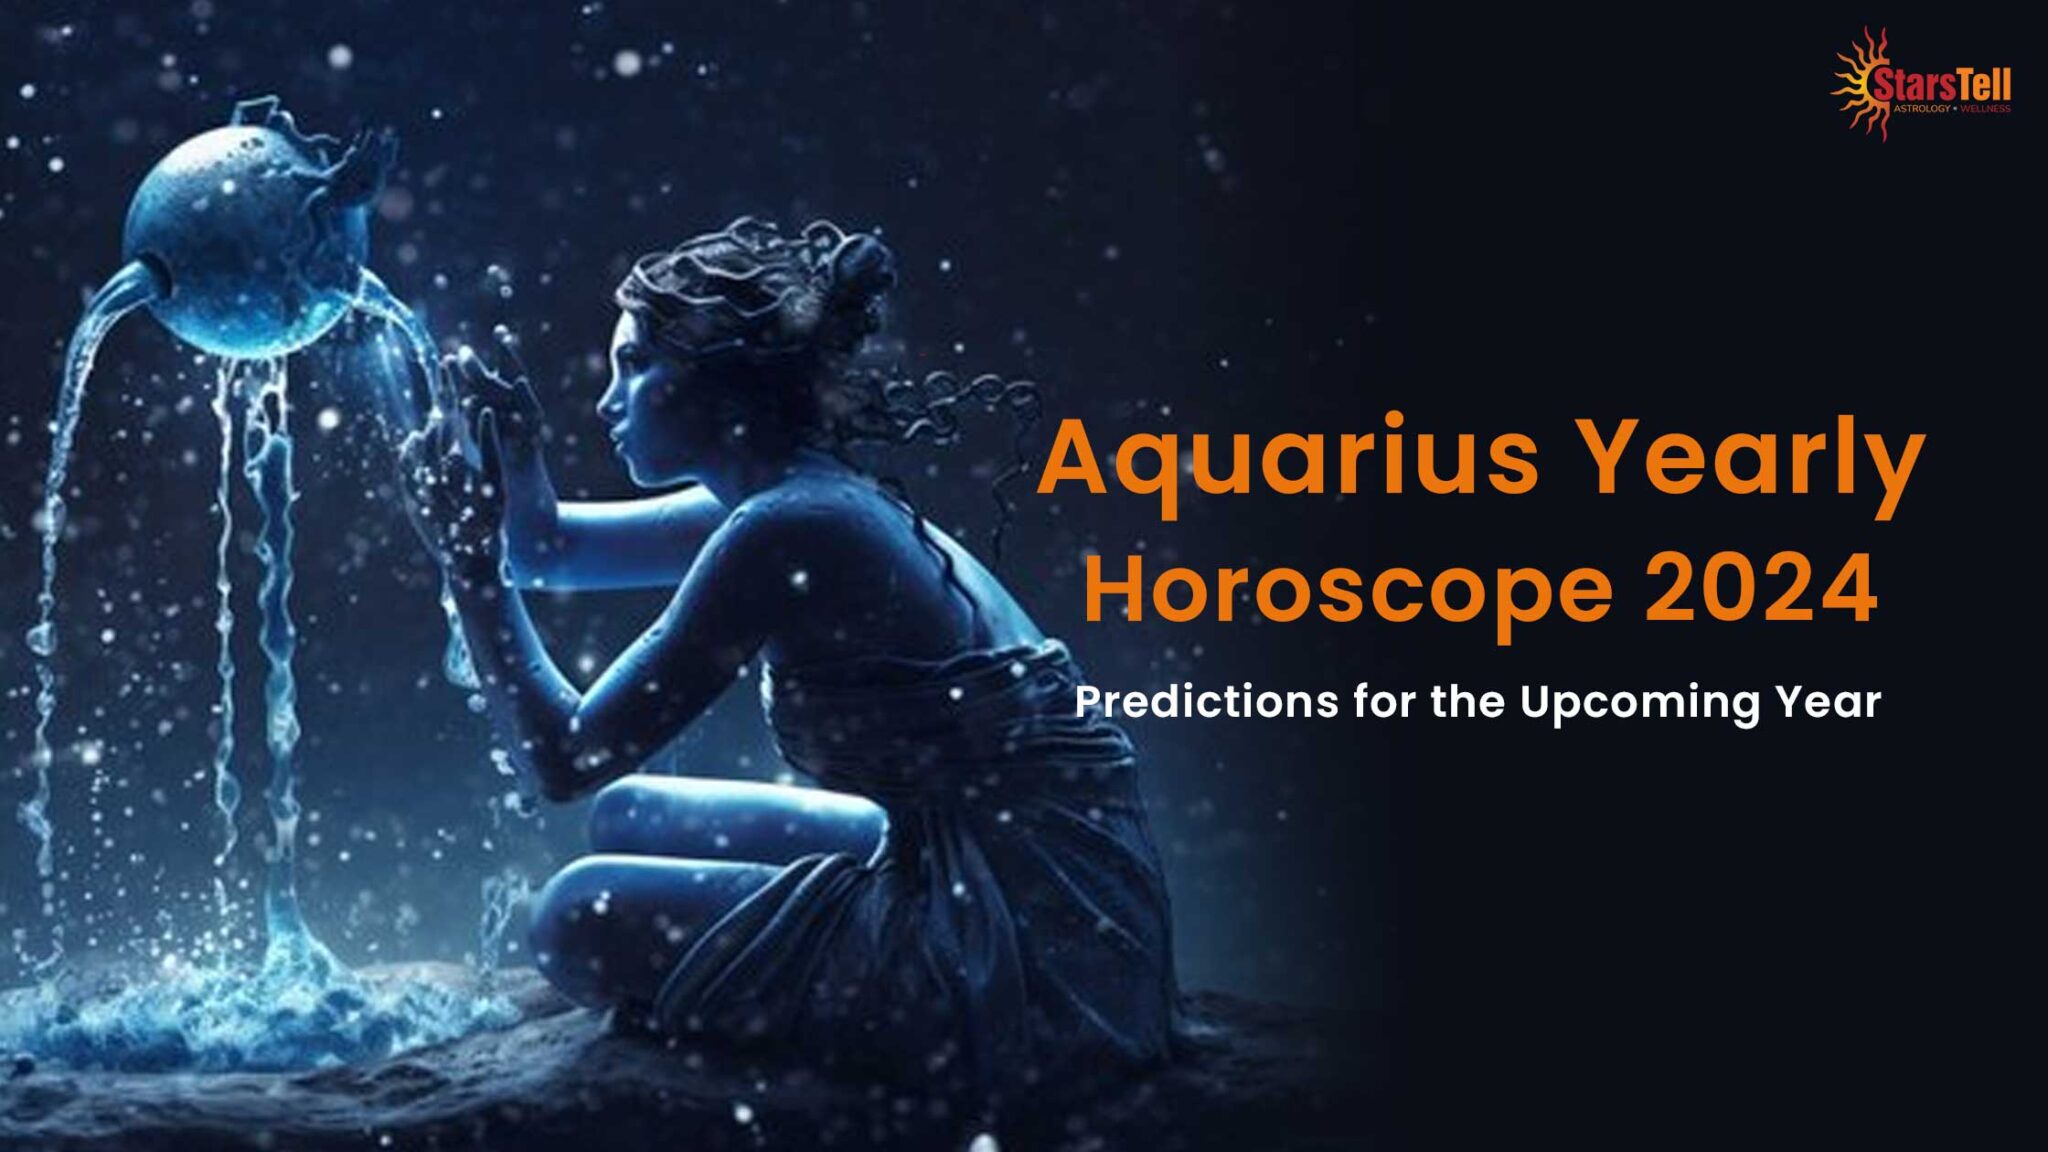 Aquarius Yearly Horoscope 2024 Predictions for the Year